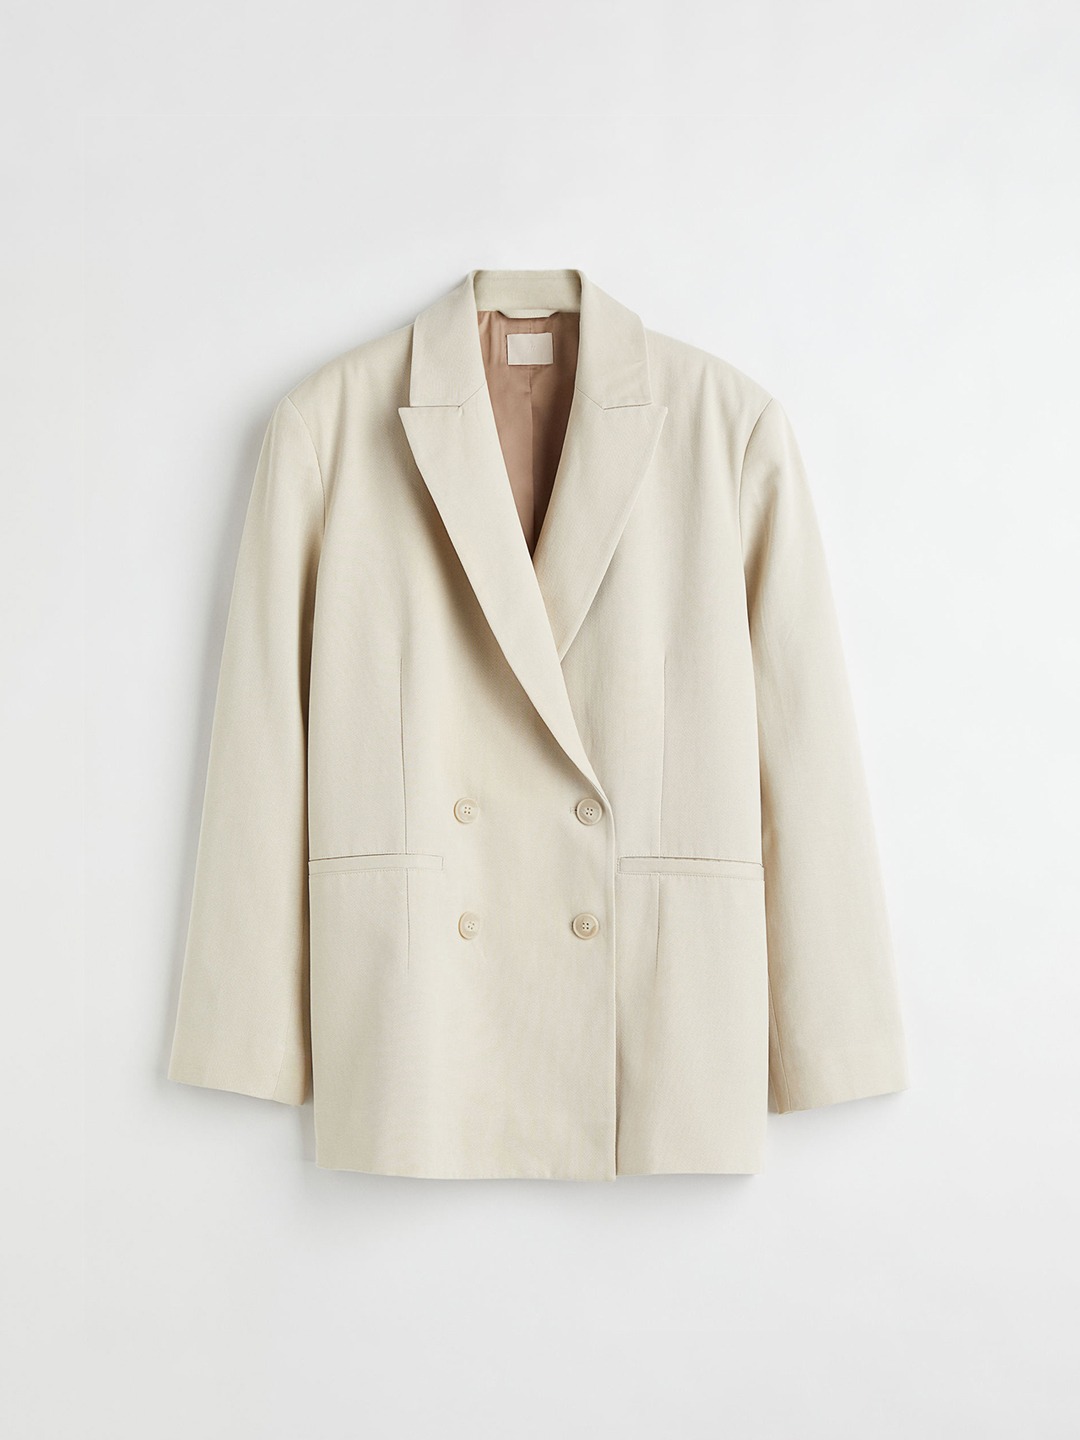 Clothing Blazers | H&M Women Beige Double Breasted Jacket - HQ60470